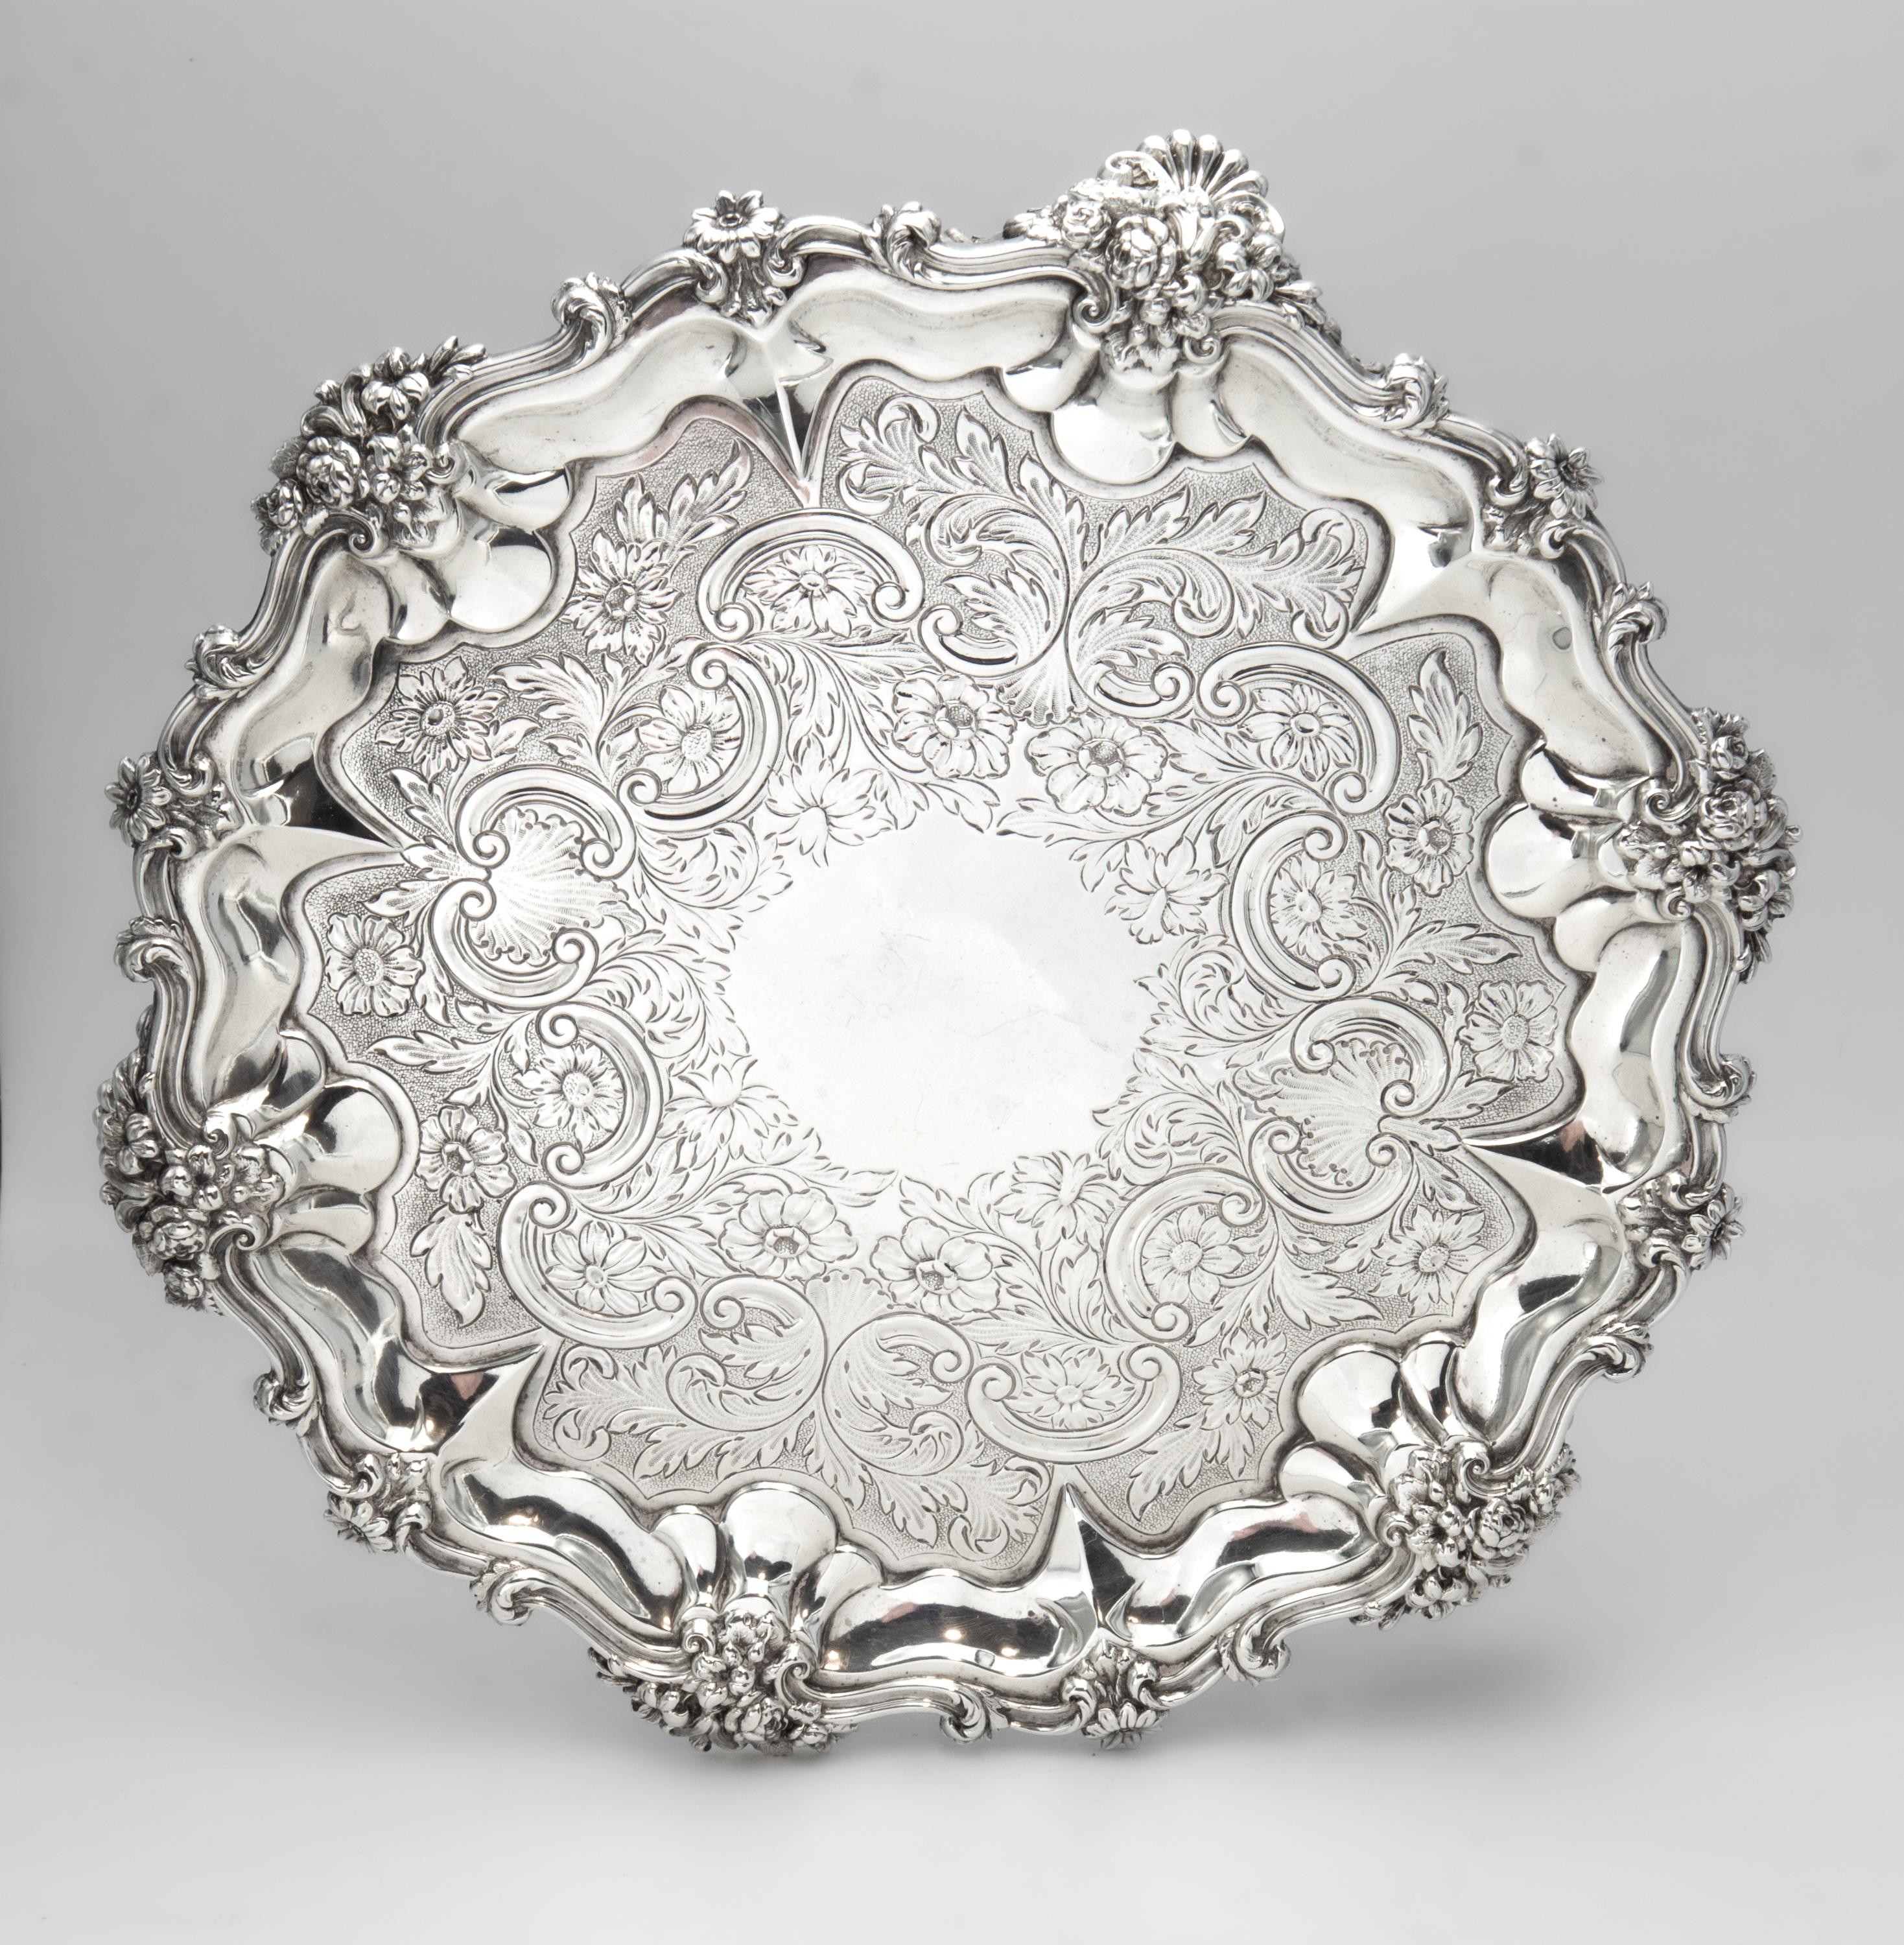 Antique William IV Sterling Silver Flat-Chased Waiter Tray London 1831 For Sale 6